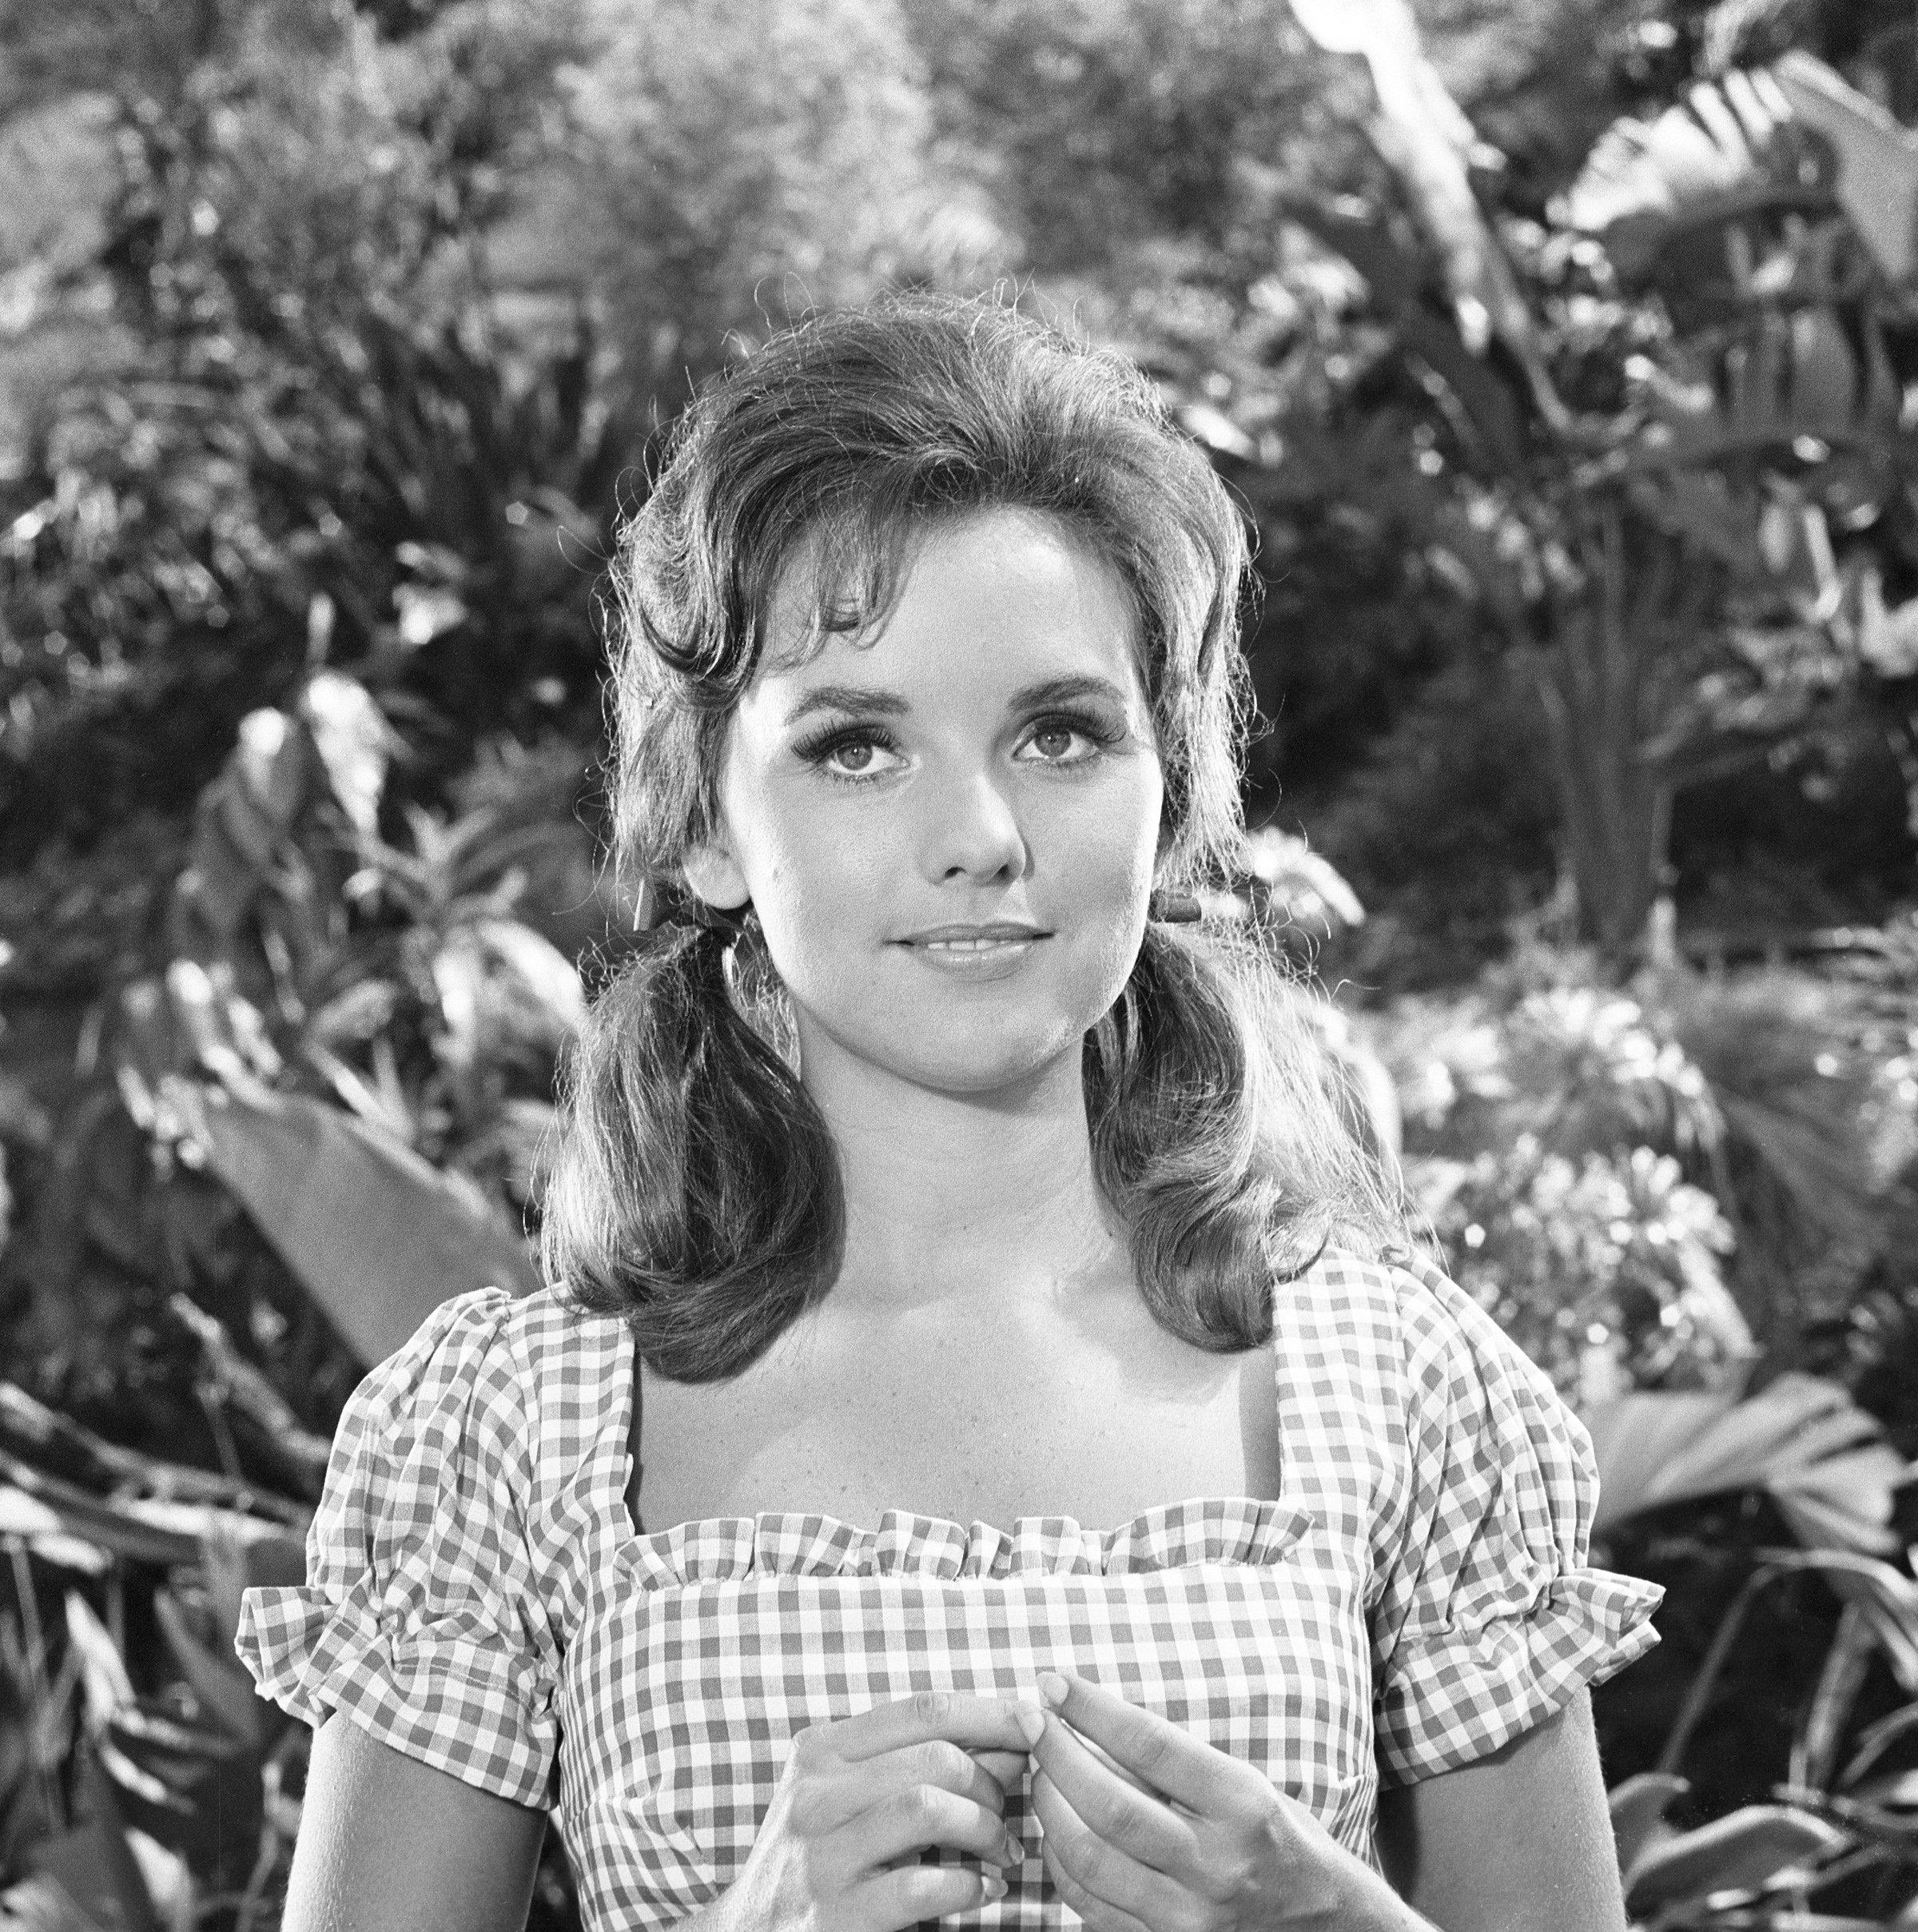 Dawn Wells as Mary Ann Summers for the episode "Two on a Raft" on the "Gilligan's Island" TV series on July 21, 1964. | Source: Getty Images